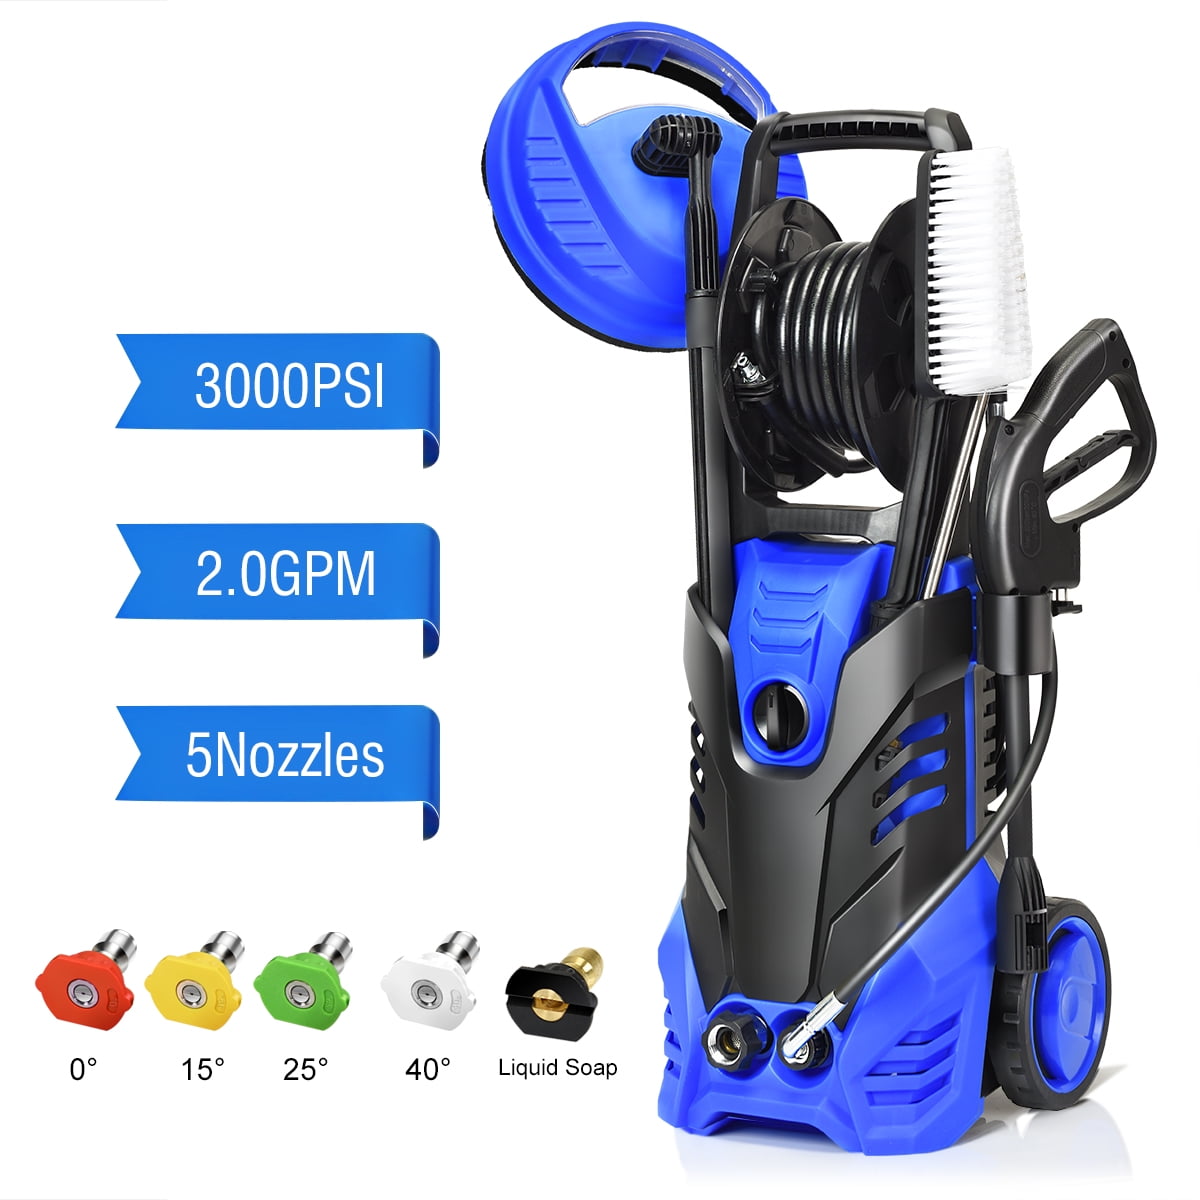 Giantex 3000PSI Electric Pressure Washer, Portable High Power